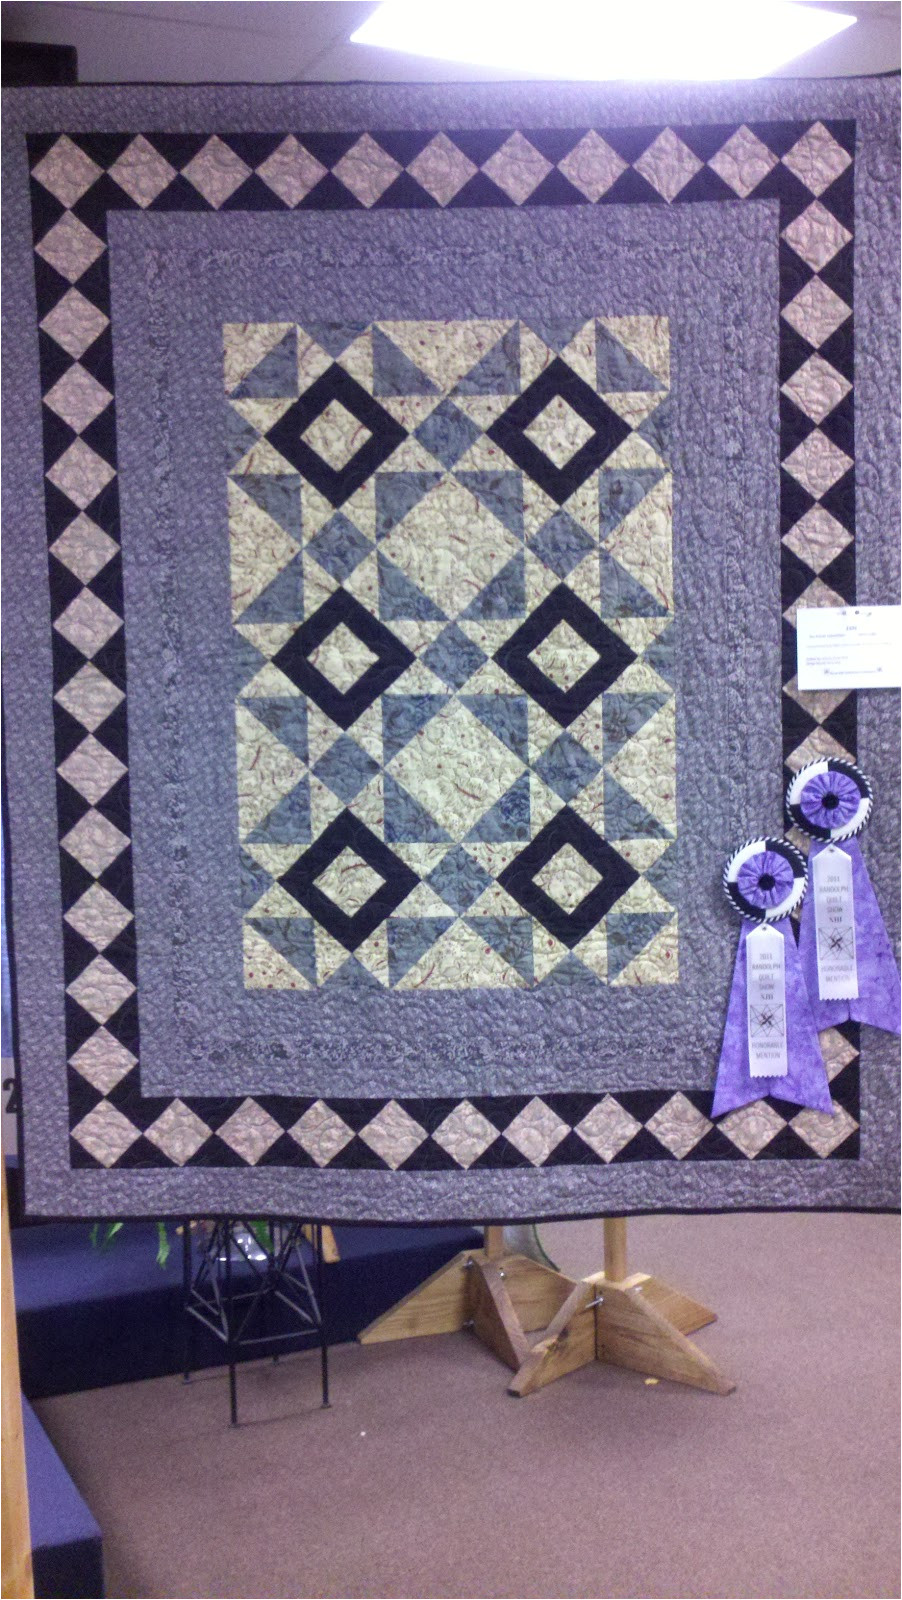 was terrific lots of beautiful quilts such a talented group if you missed it here are a few of my favorites that i took pictures of